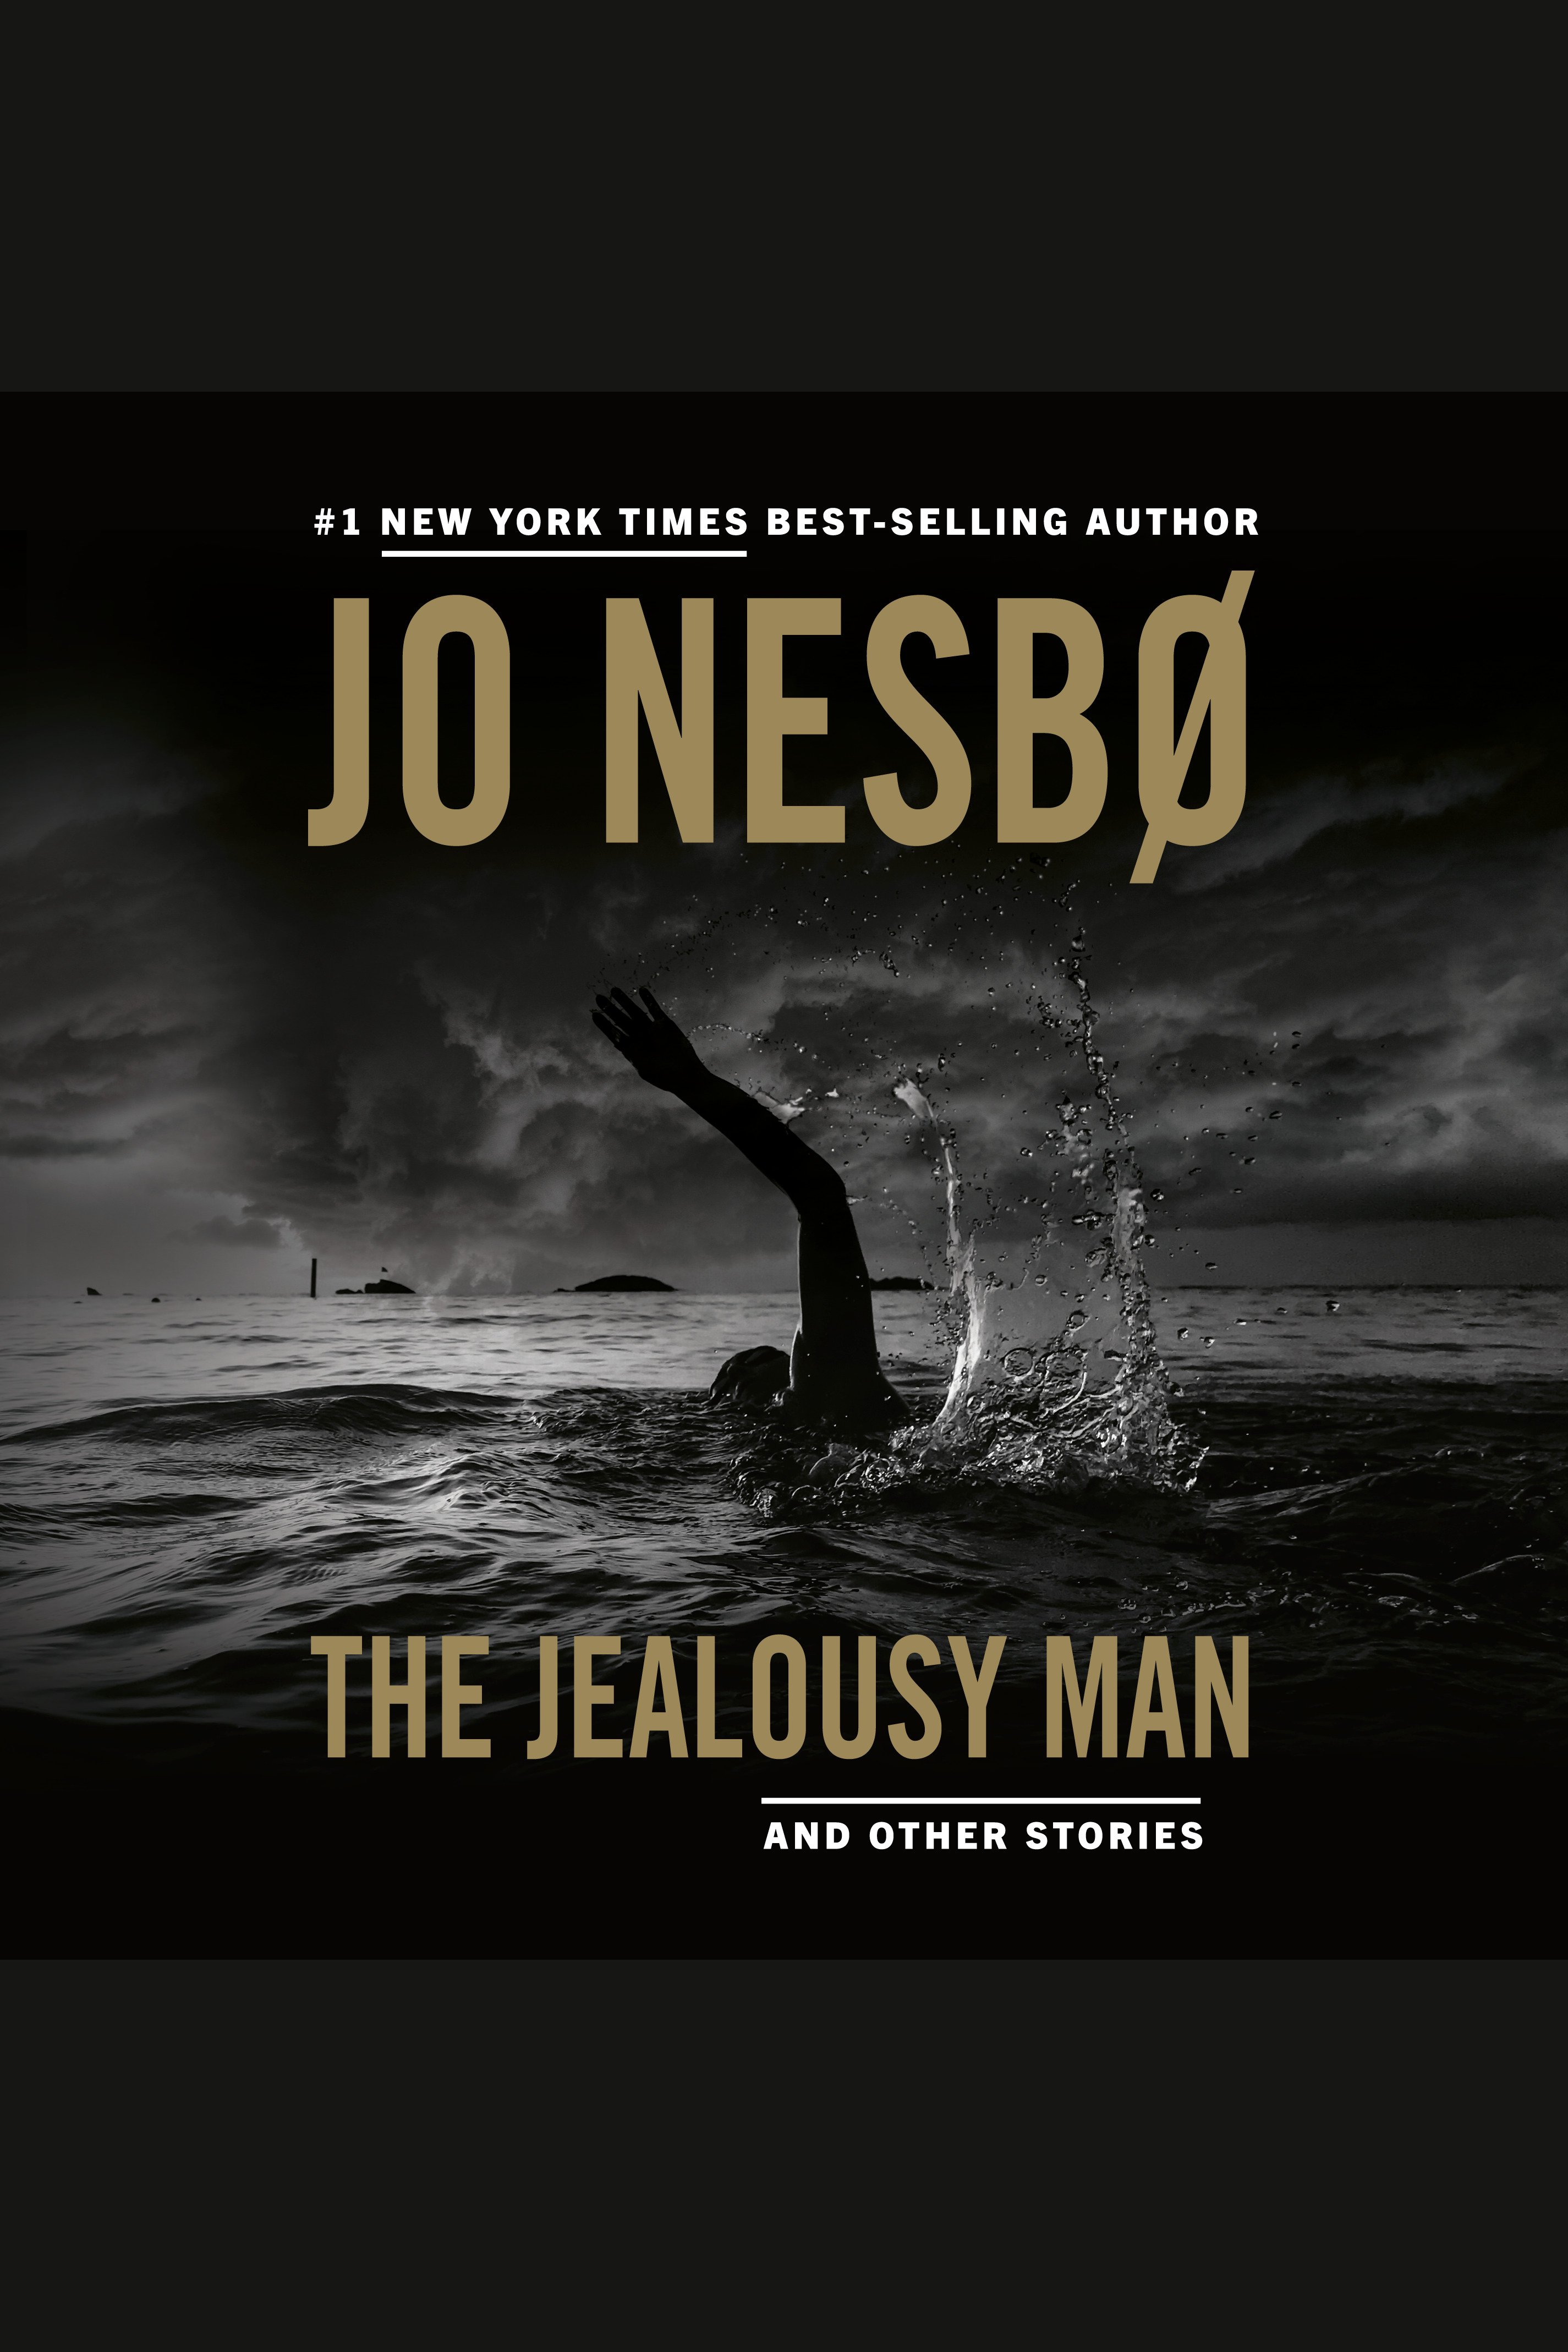 Jealousy Man and Other Stories, The